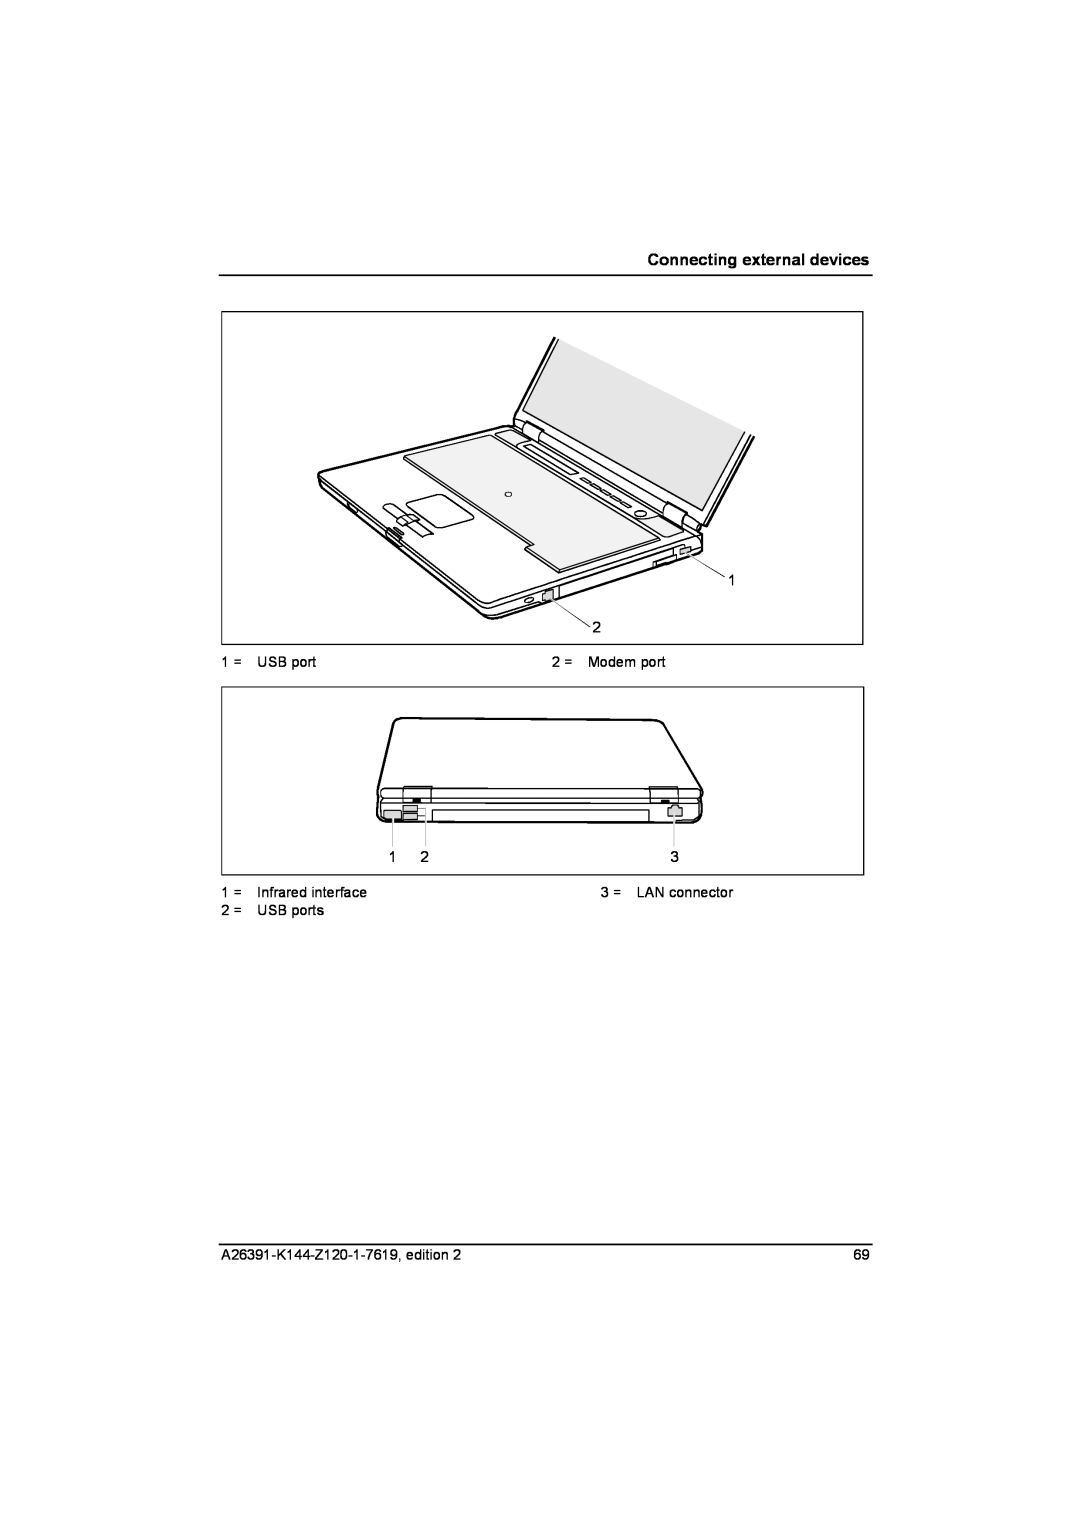 Fujitsu S SERIES manual Connecting external devices, 1 = USB port, 2 = Modem port, Infrared interface, 3 = LAN connector 